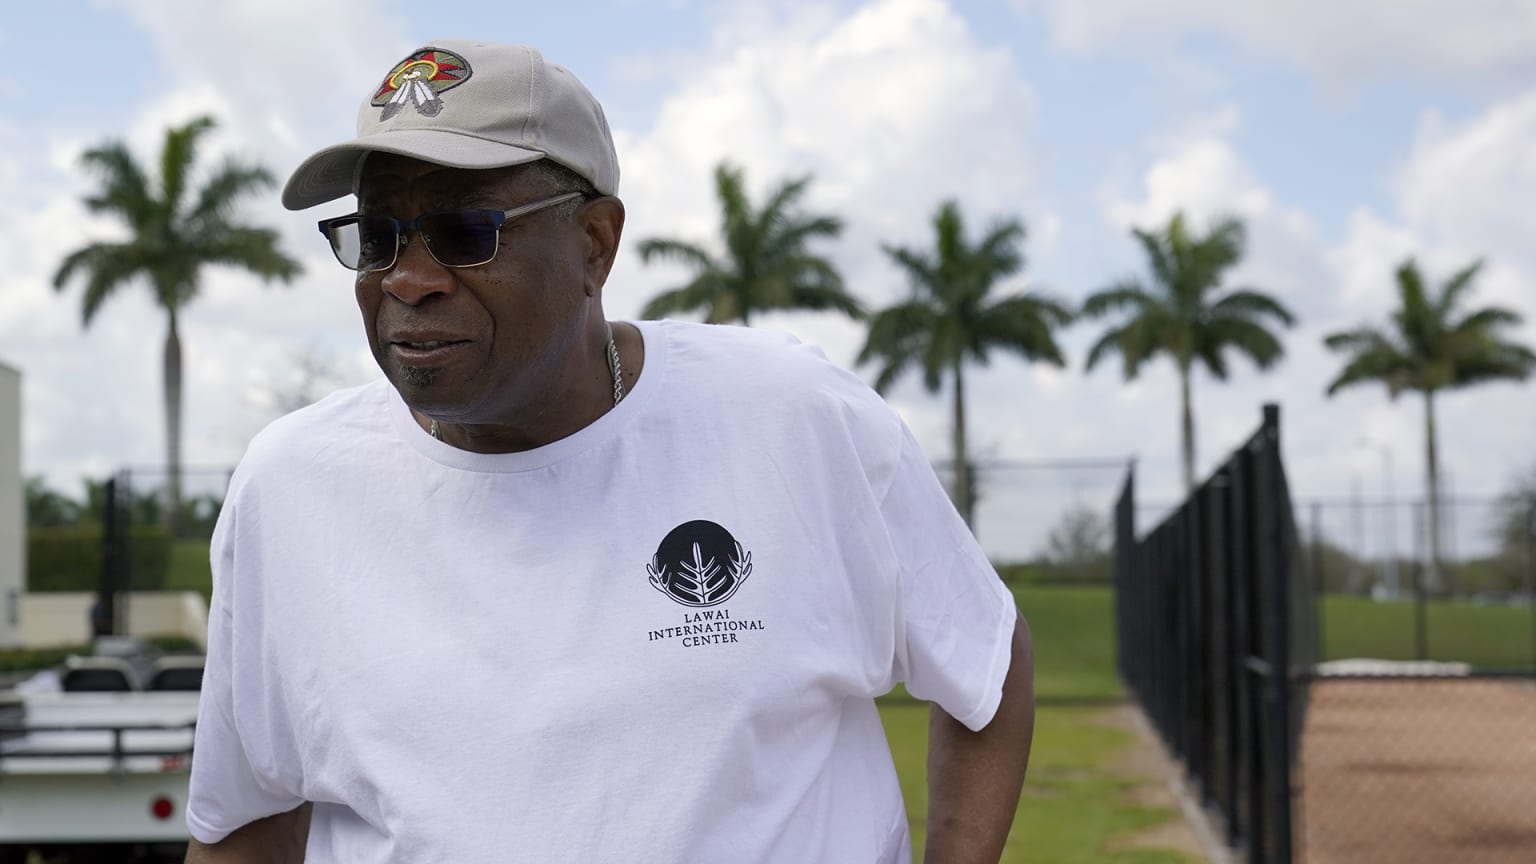 Dusty Baker in a white T-shirt, sunglasses and a beige cap in front of some palm trees